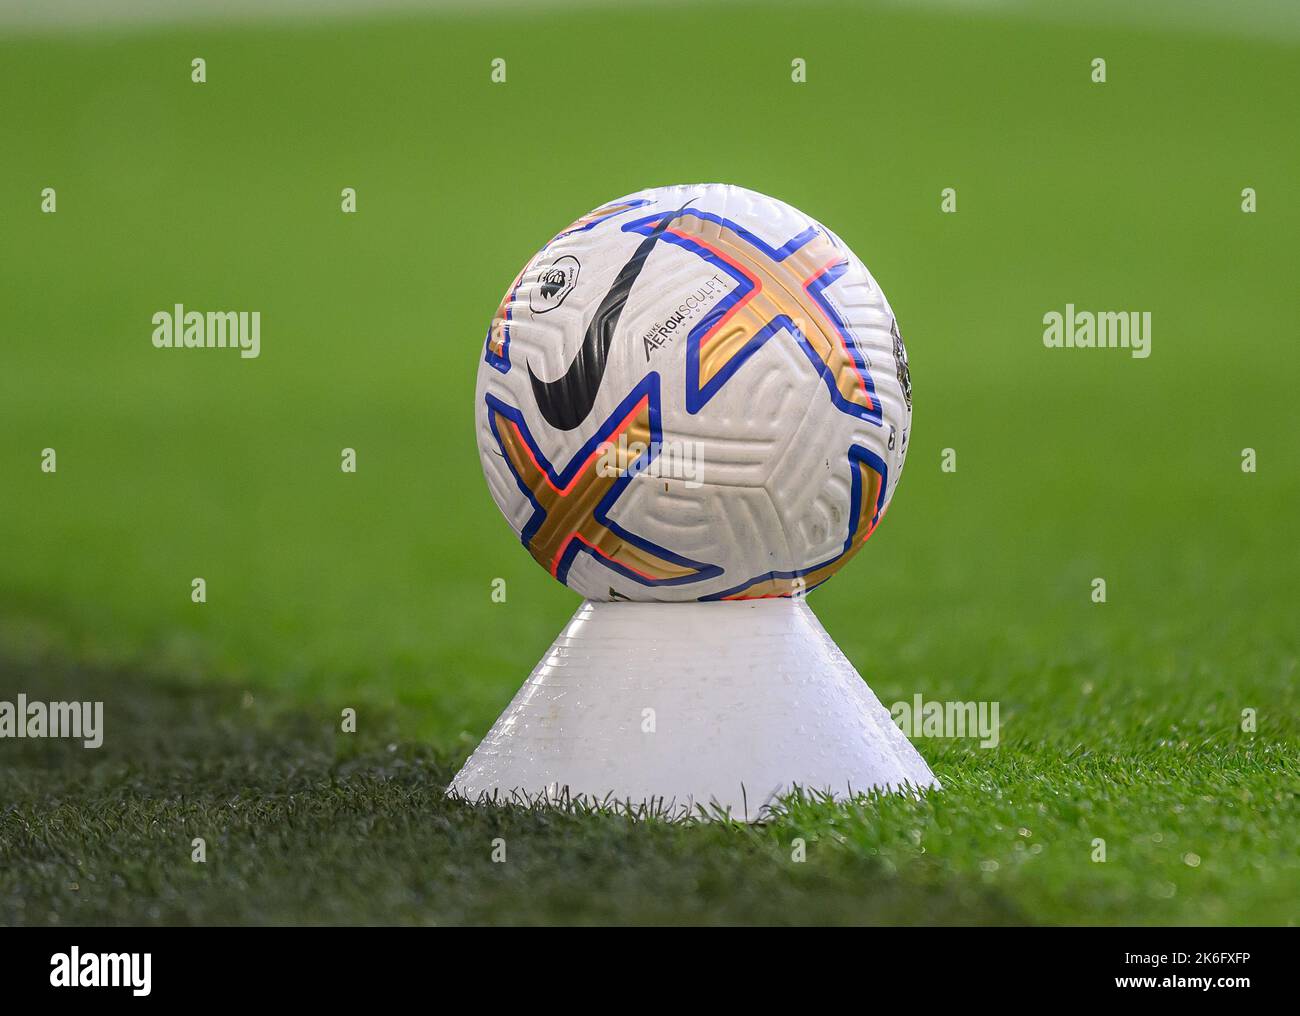 08 Oct 2022 - Brighton and Hove Albion v Tottenham Hotspur - Premier League - Amex Stadium  The official Nike Premier League football in use during the Premier League match at the Amex Stadium. Picture : Mark Pain / Alamy Live News Stock Photo